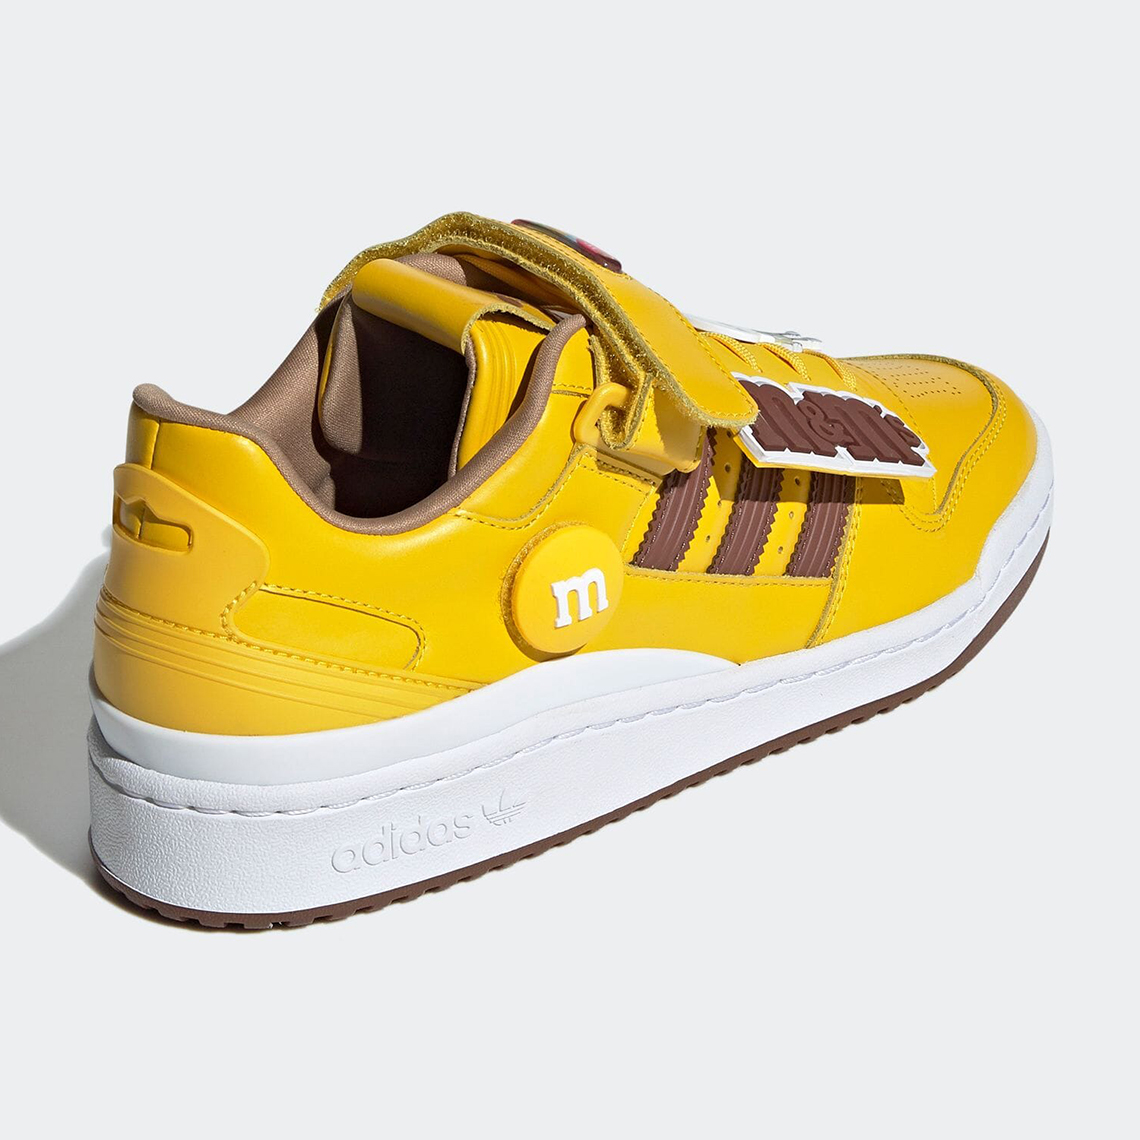 Adidas Forum Low Mm Gy1179 Release Date 3